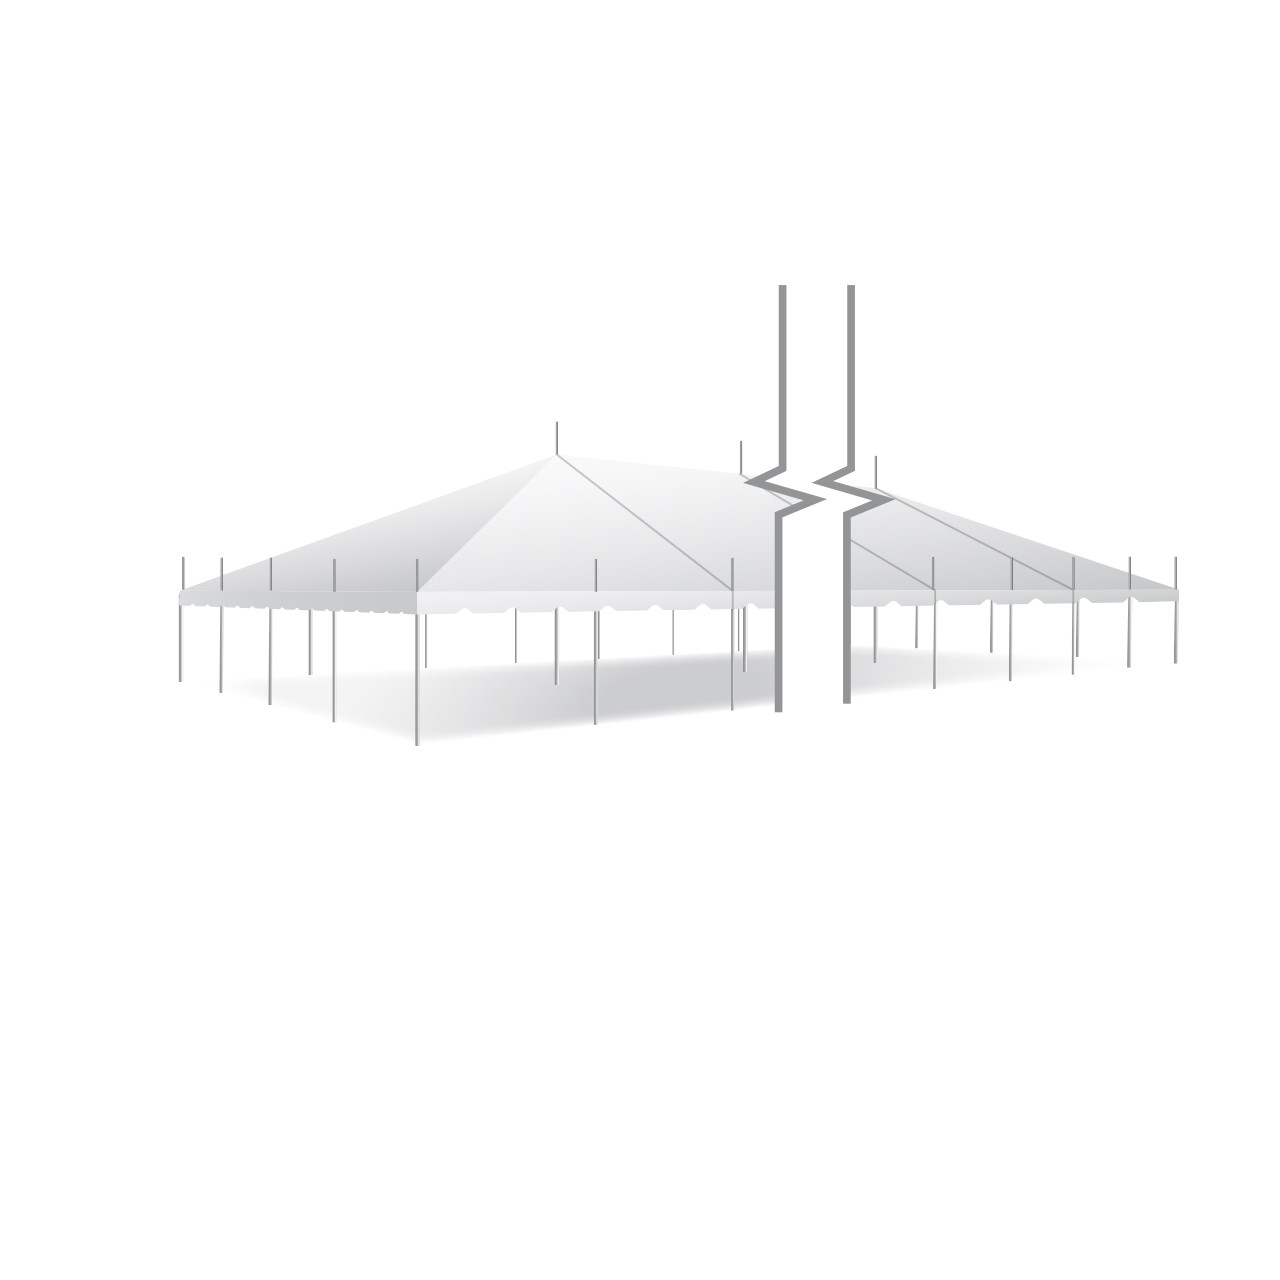 40' x 240' Classic Series Pole Tent, Sectional Tent Top, Complete